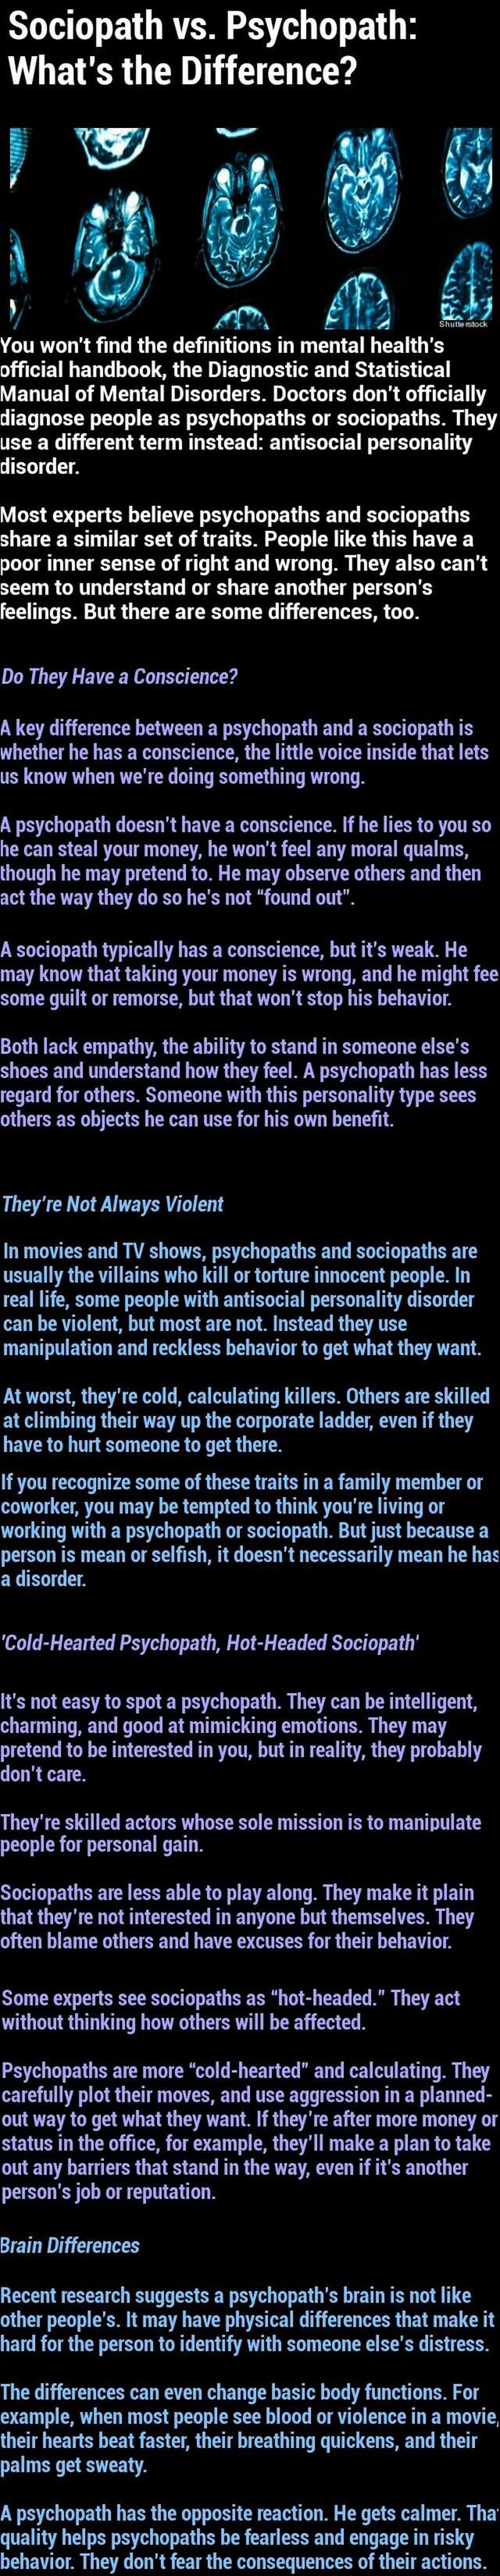 What is a sociopaths weakness